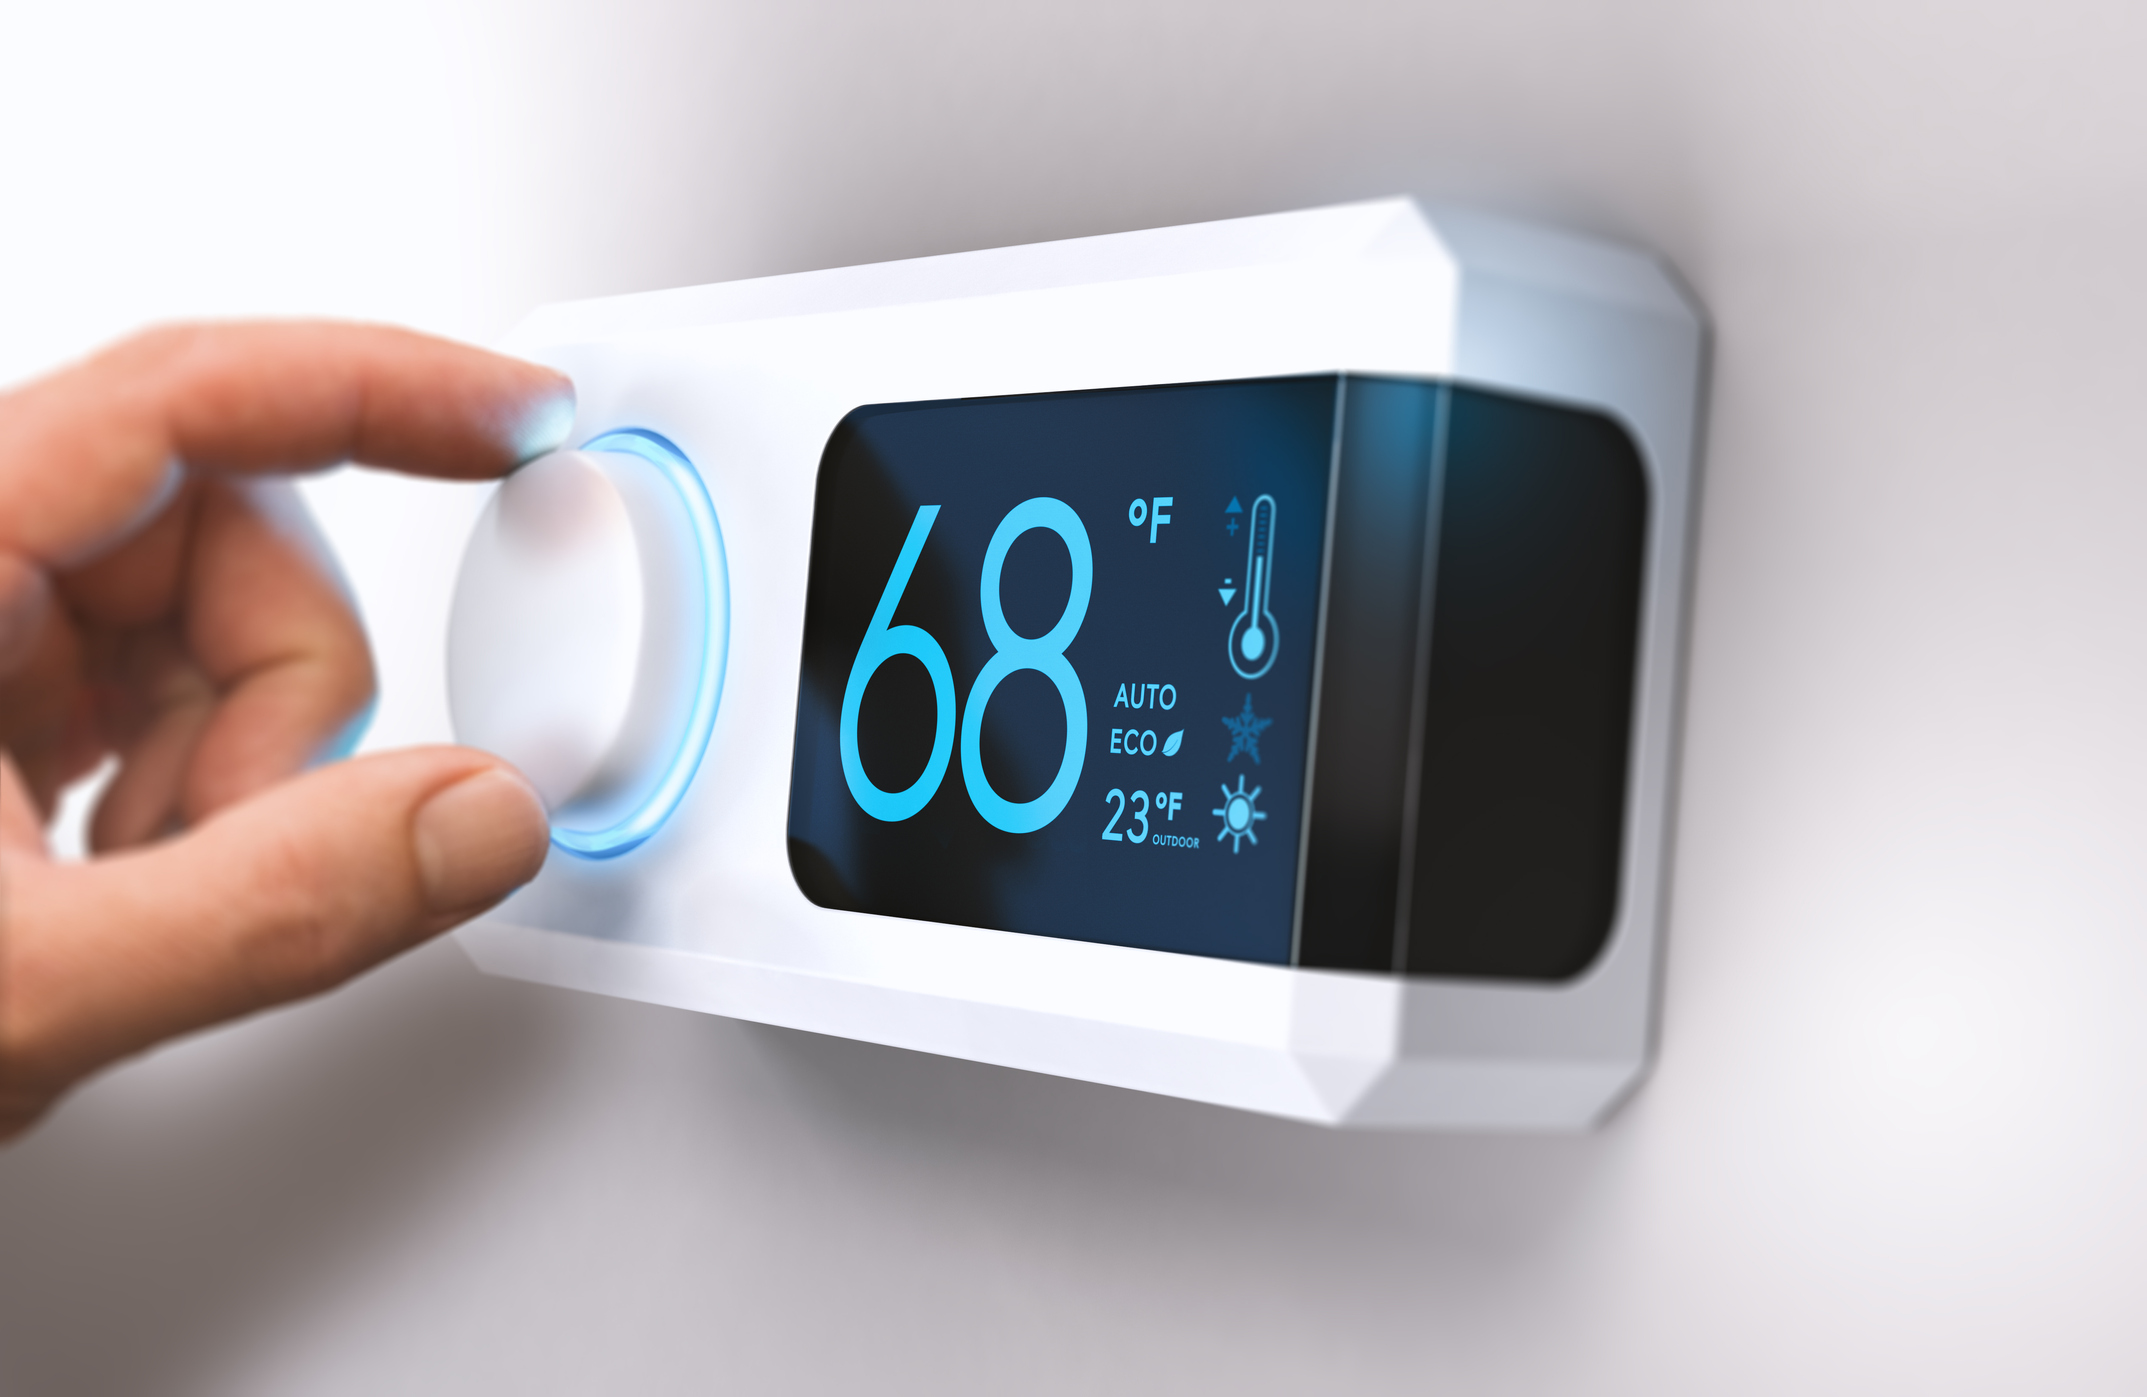 thermostat showing 68 degrees being turned down